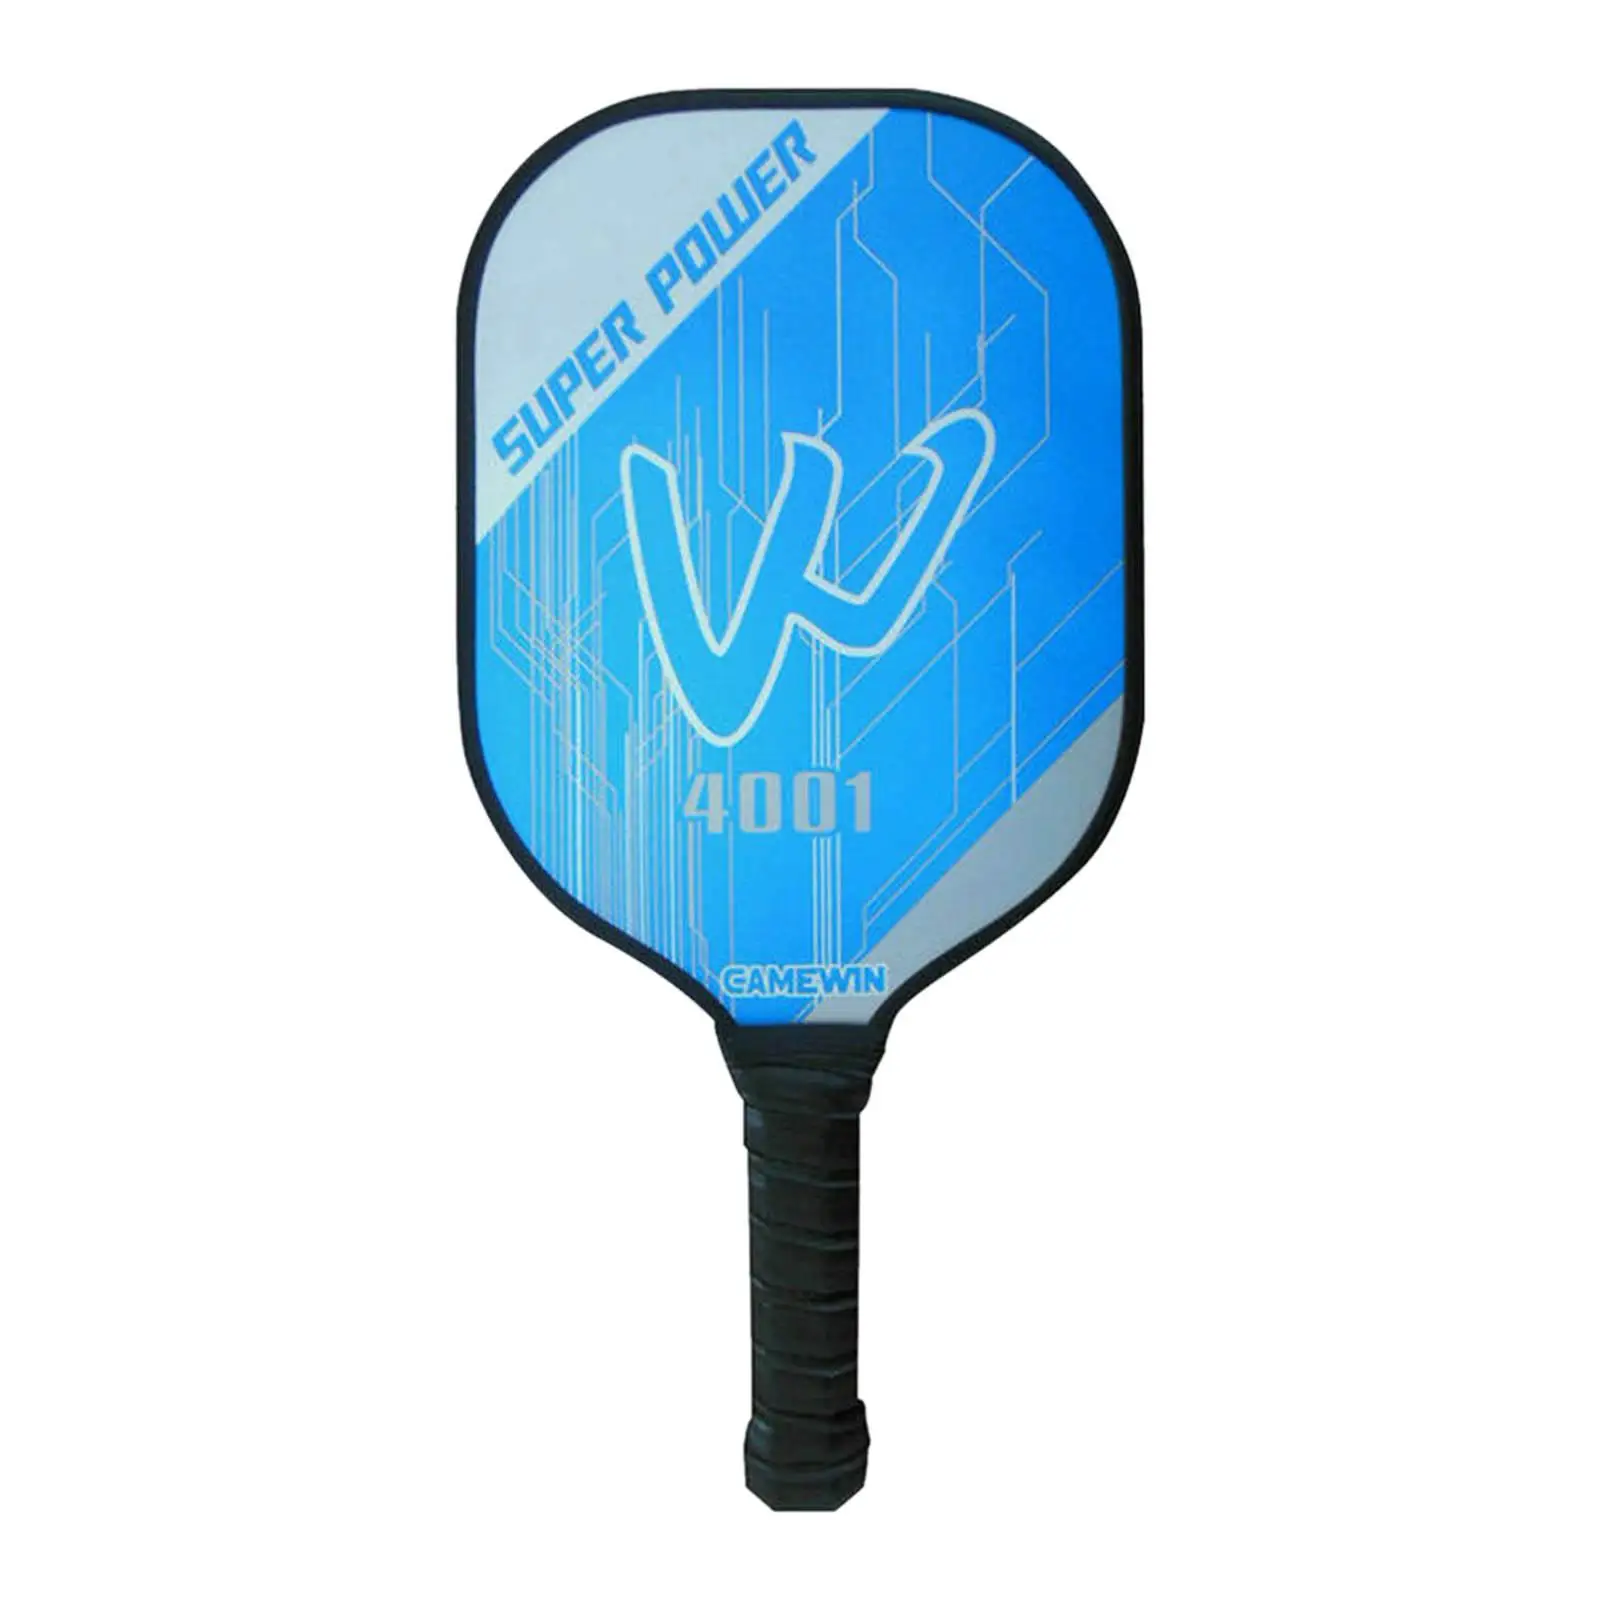 Paddle Carbon Fiber Surface Protable Racket for Badminton Table Tennis Training Outdoor